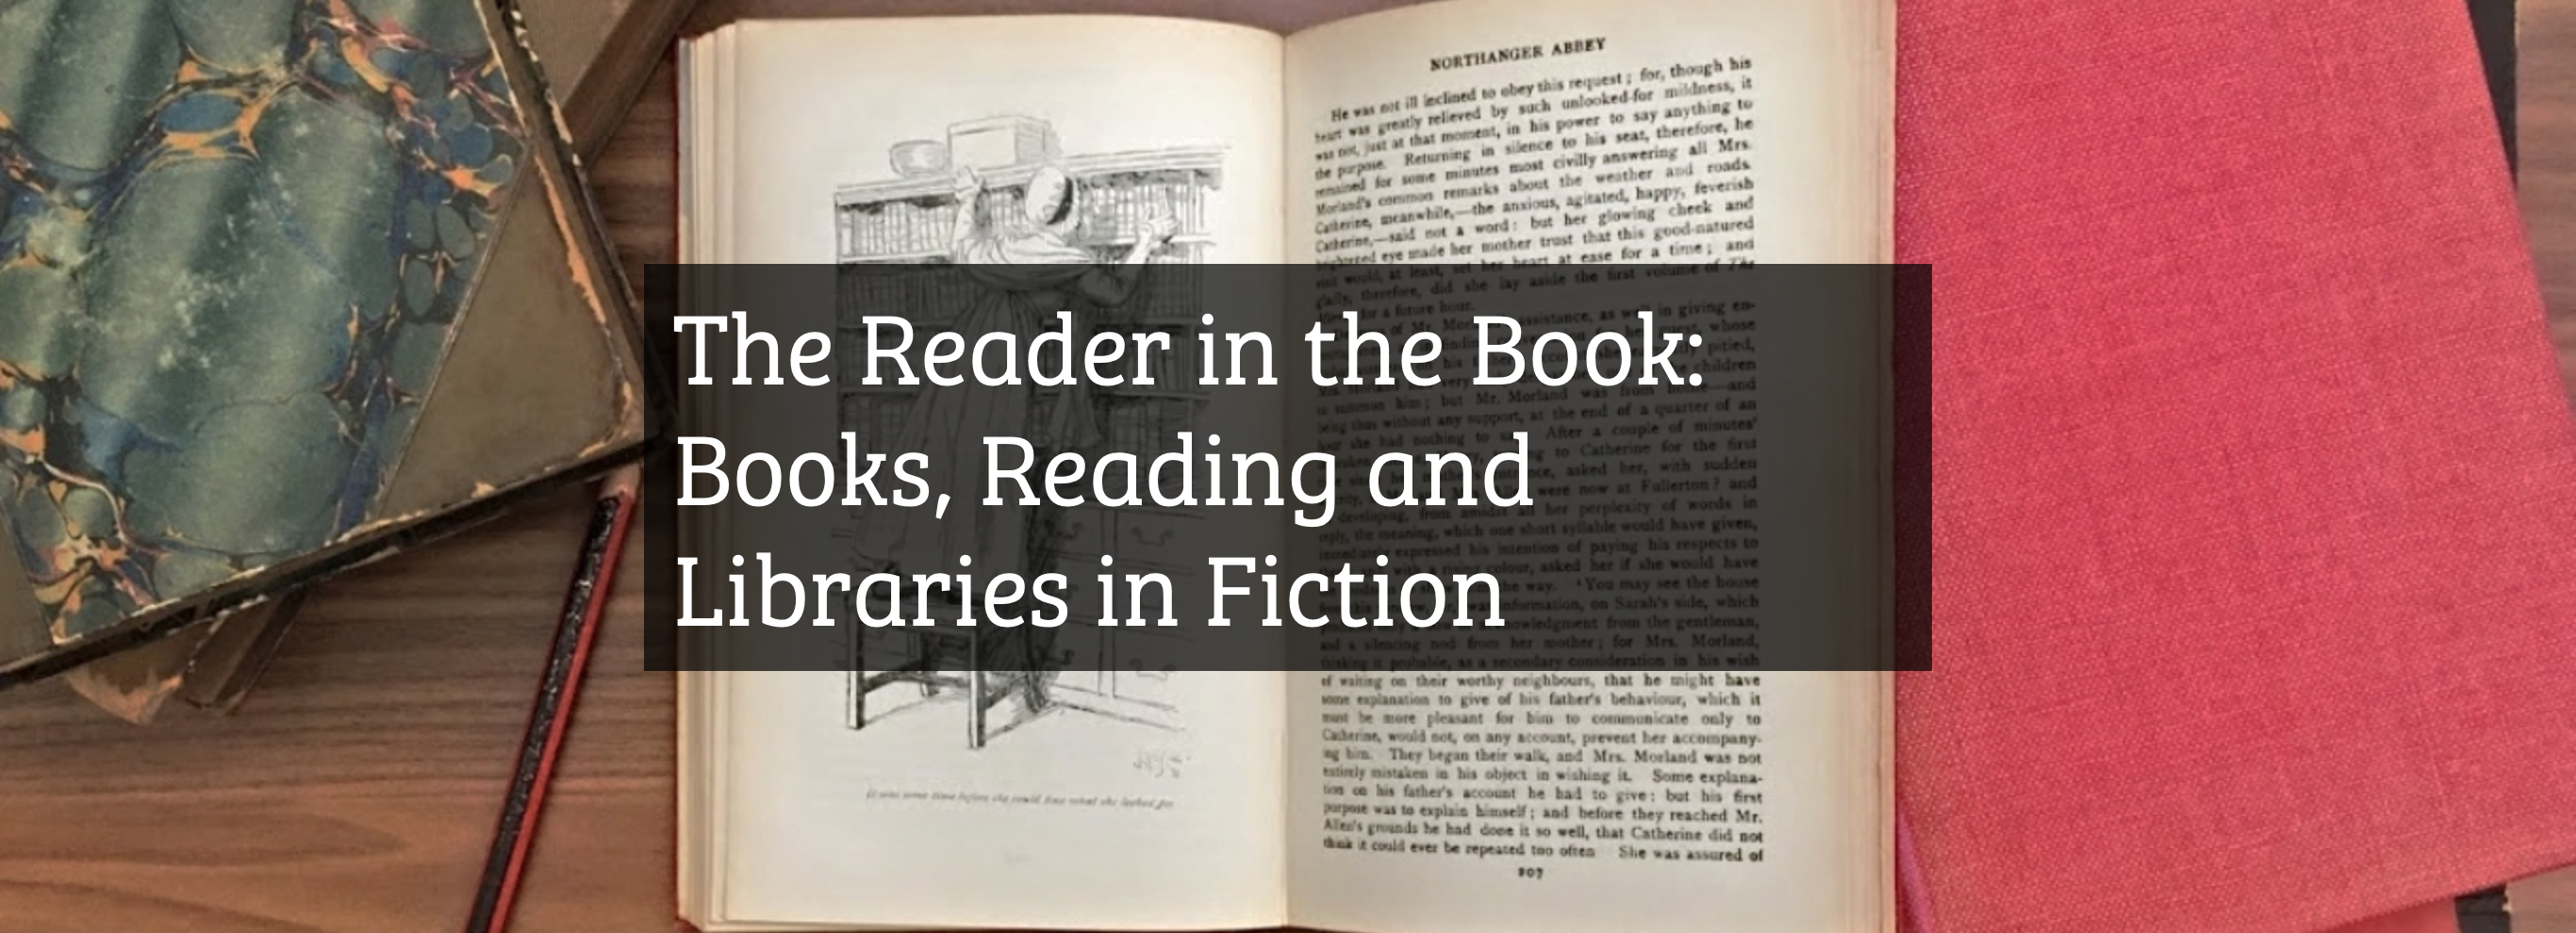 The Reader in the Book: Books, Reading and Libraries in Fiction (18, 19, 25, 26.03.21)